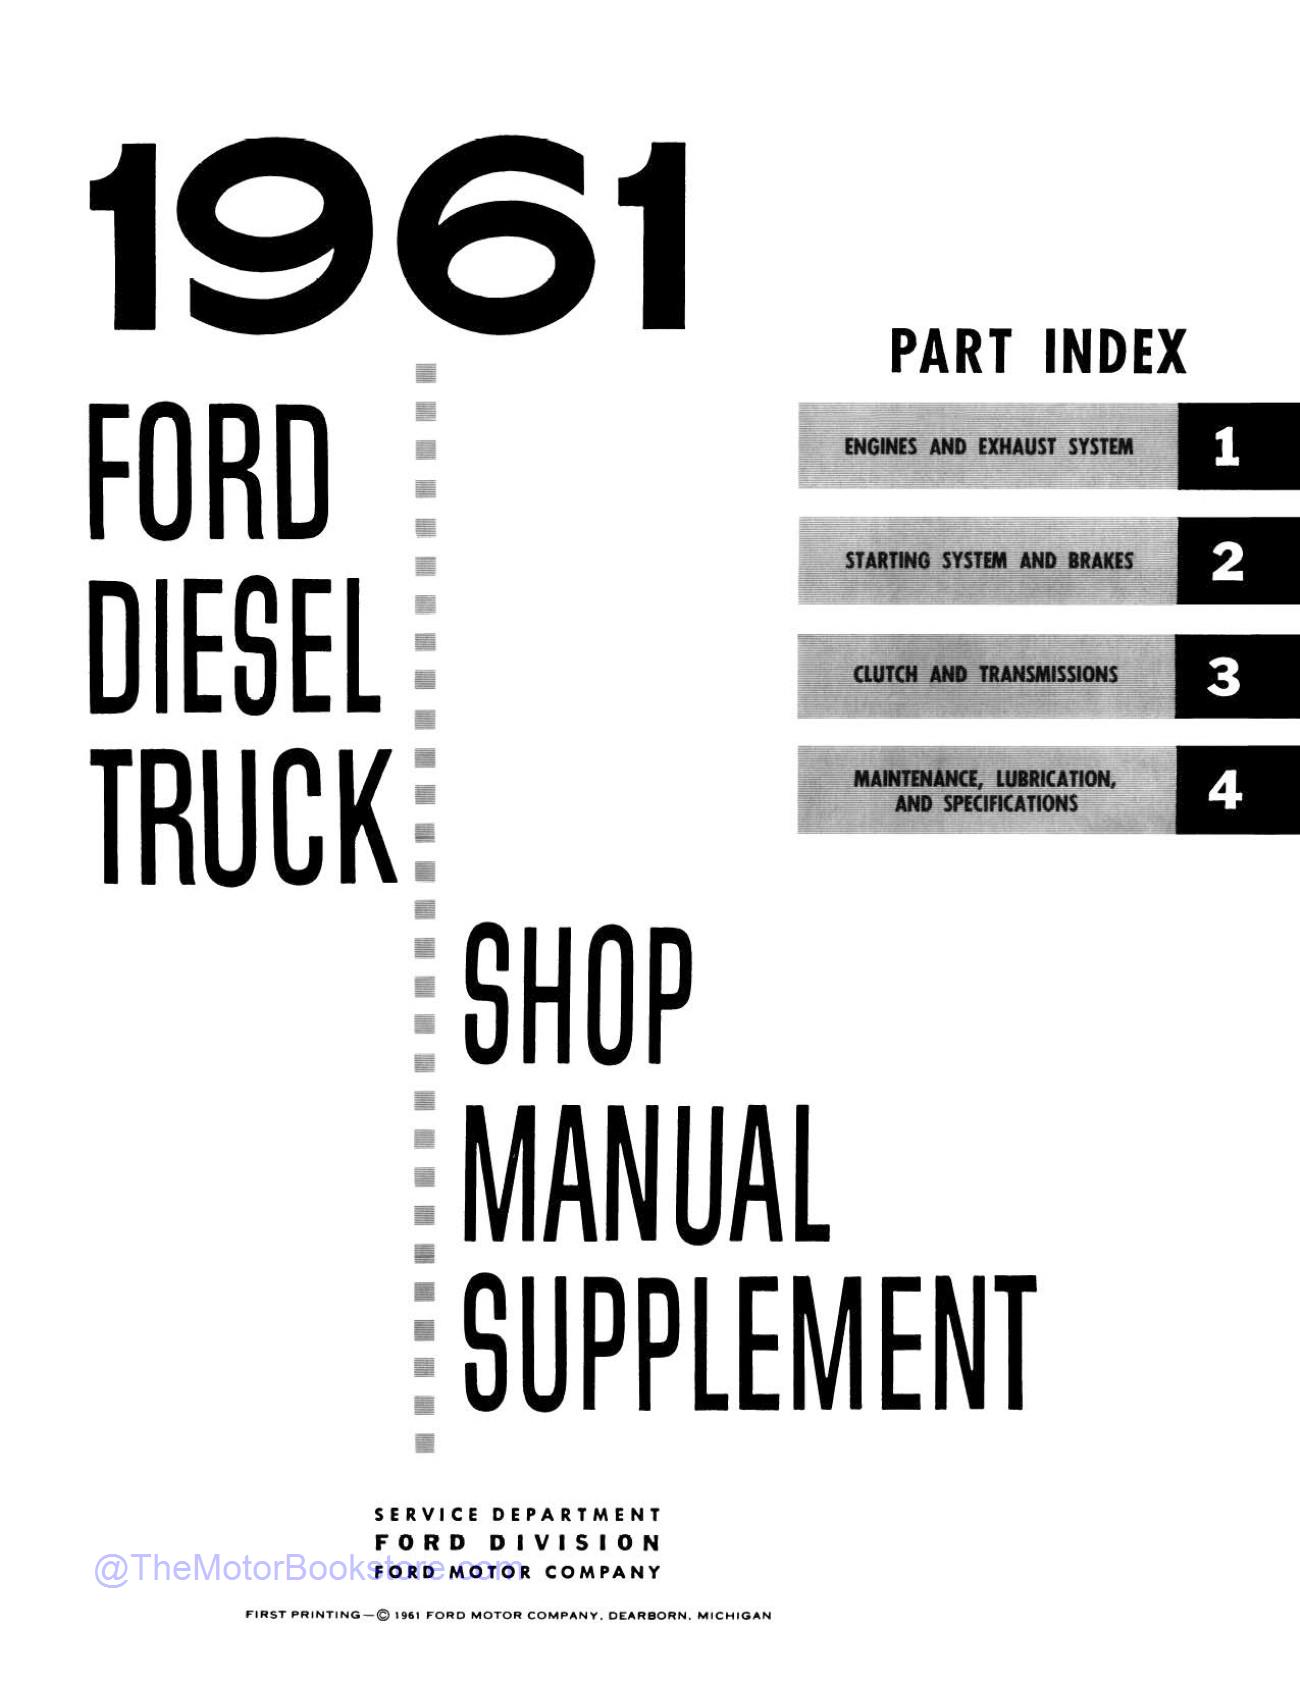 1961 Ford Diesel Truck Shop Manual Supplement  - Table of Contents